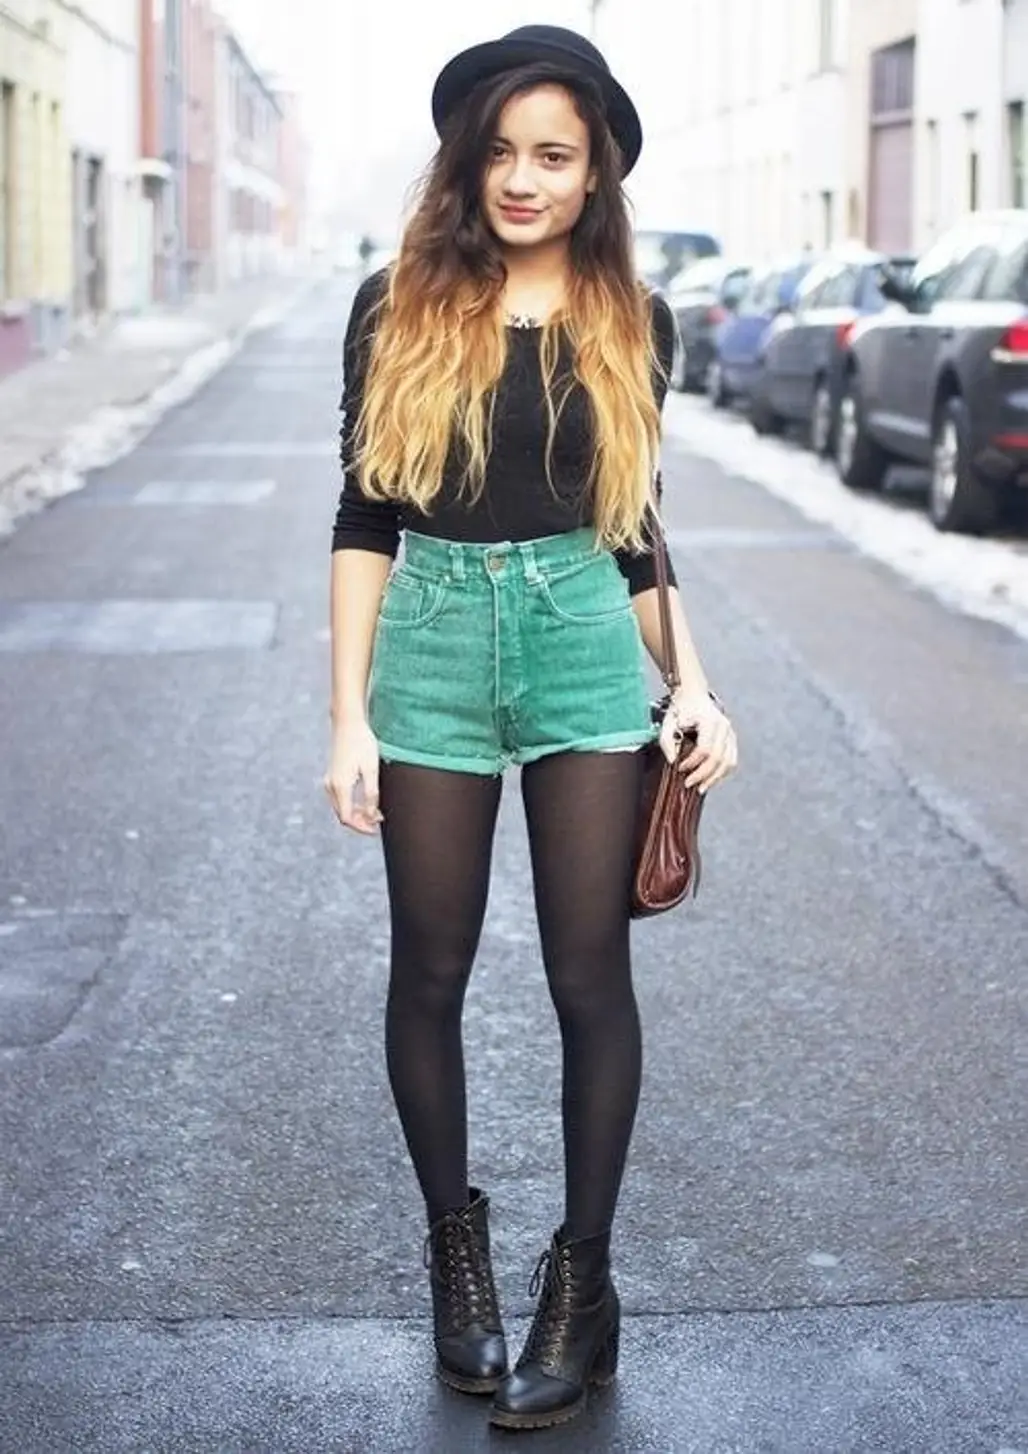 Black Tights with Shorts Dressy Summer Outfits (2 ideas & outfits